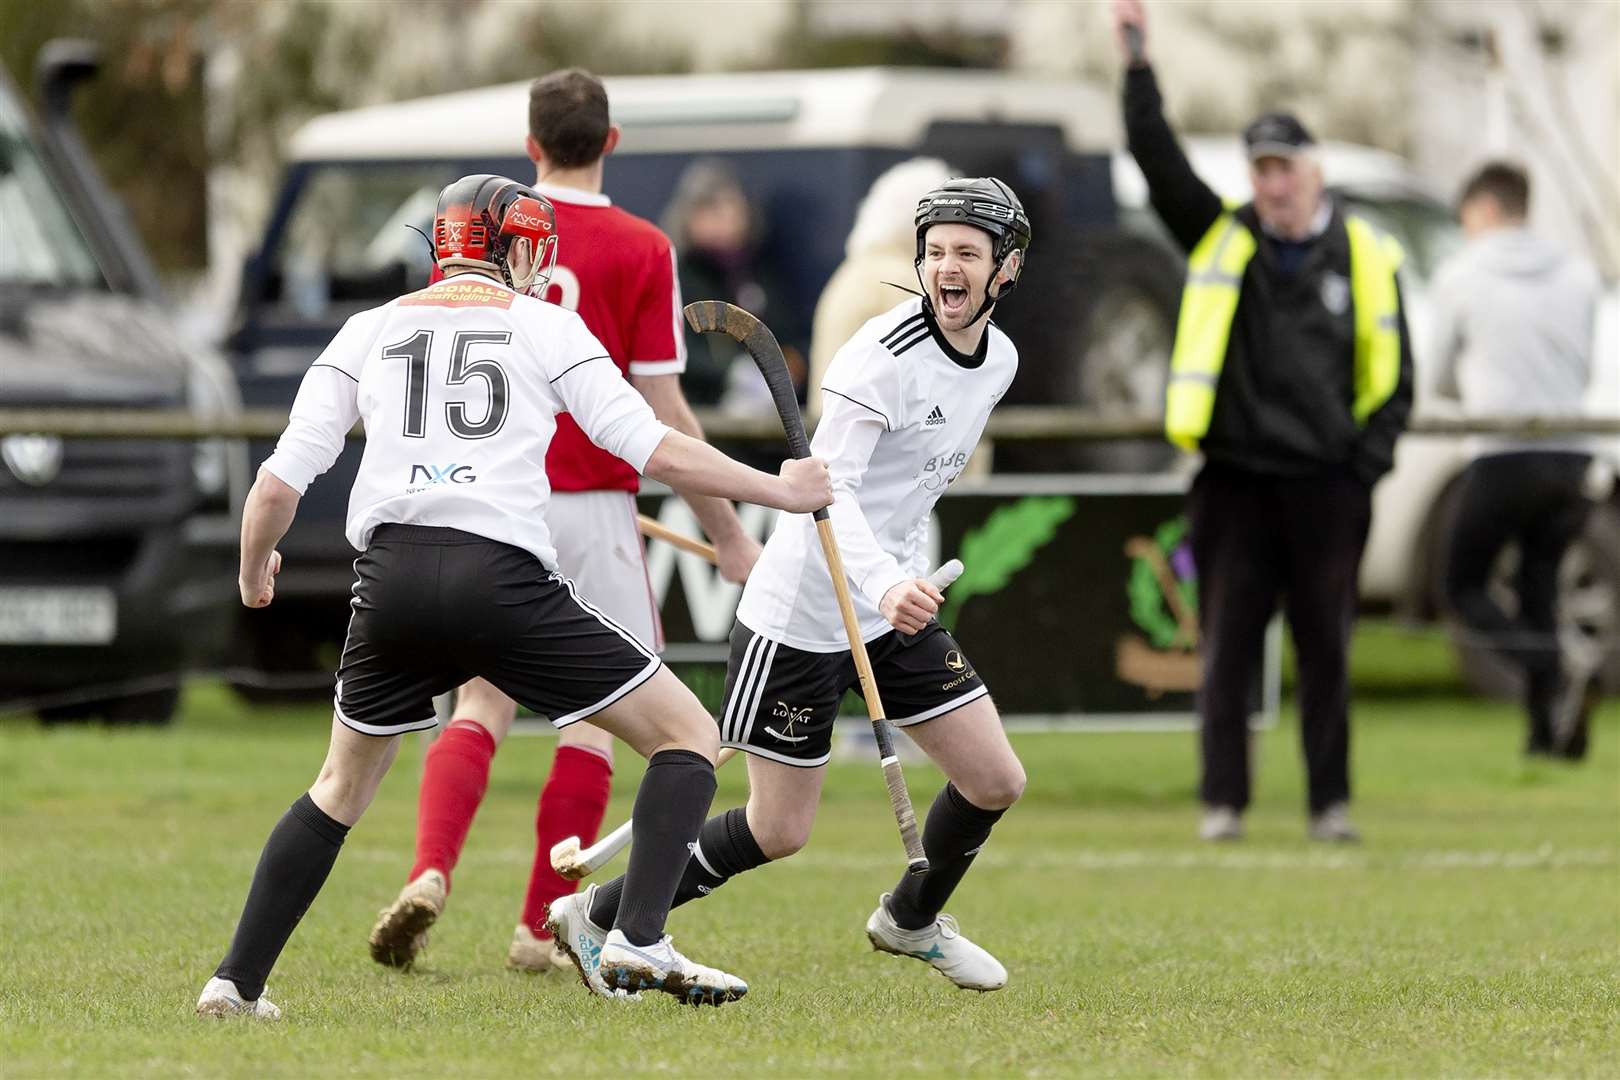 Calum MacAulay celebrates scoring Lovat’s 4th goal. Lovat v Kinlochshiel in the first round of the cottages.com MacTavish Cup, played at Balgate, Kiltarlity.